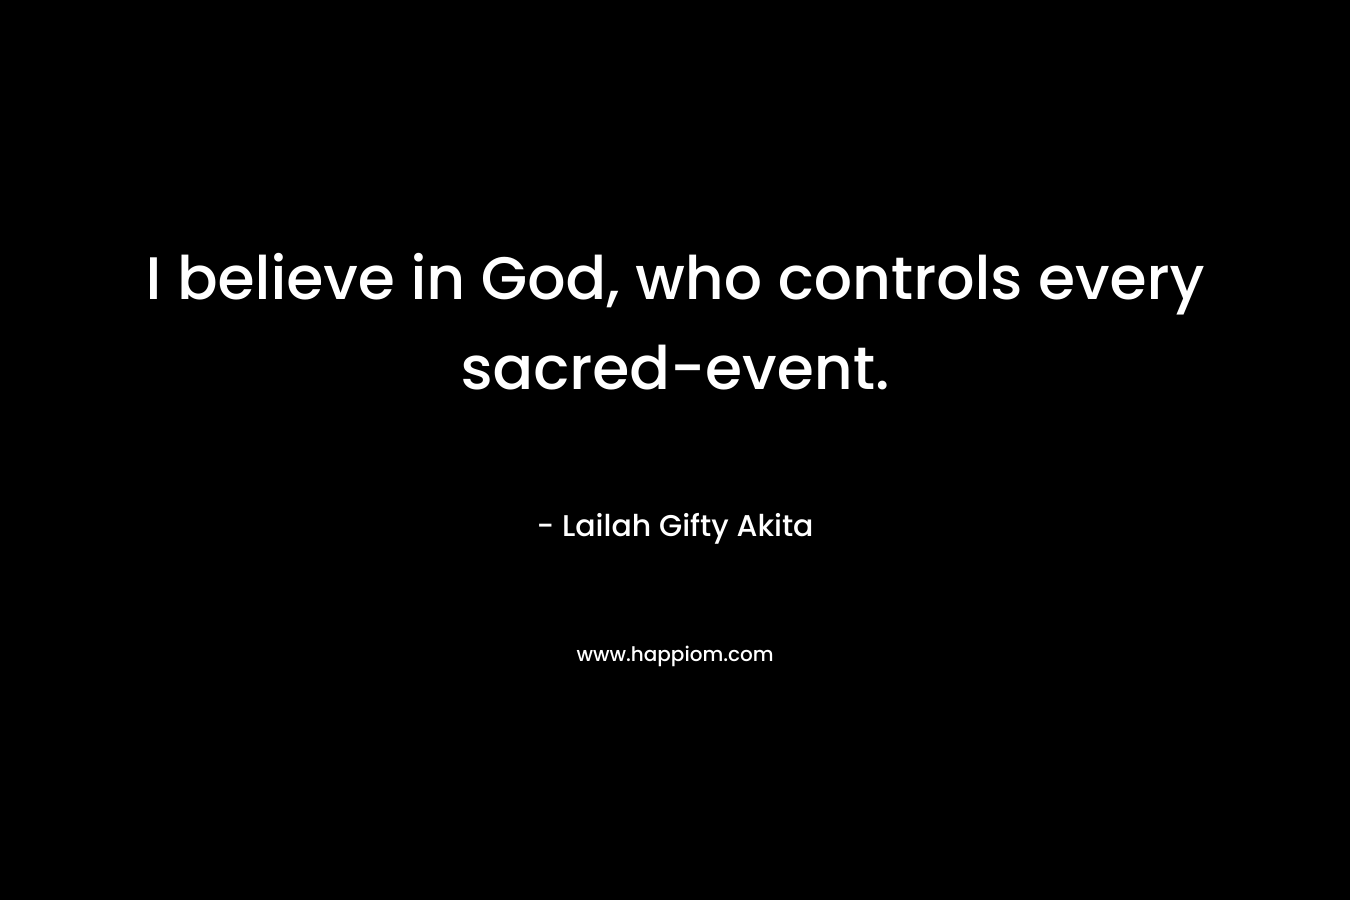 I believe in God, who controls every sacred-event.